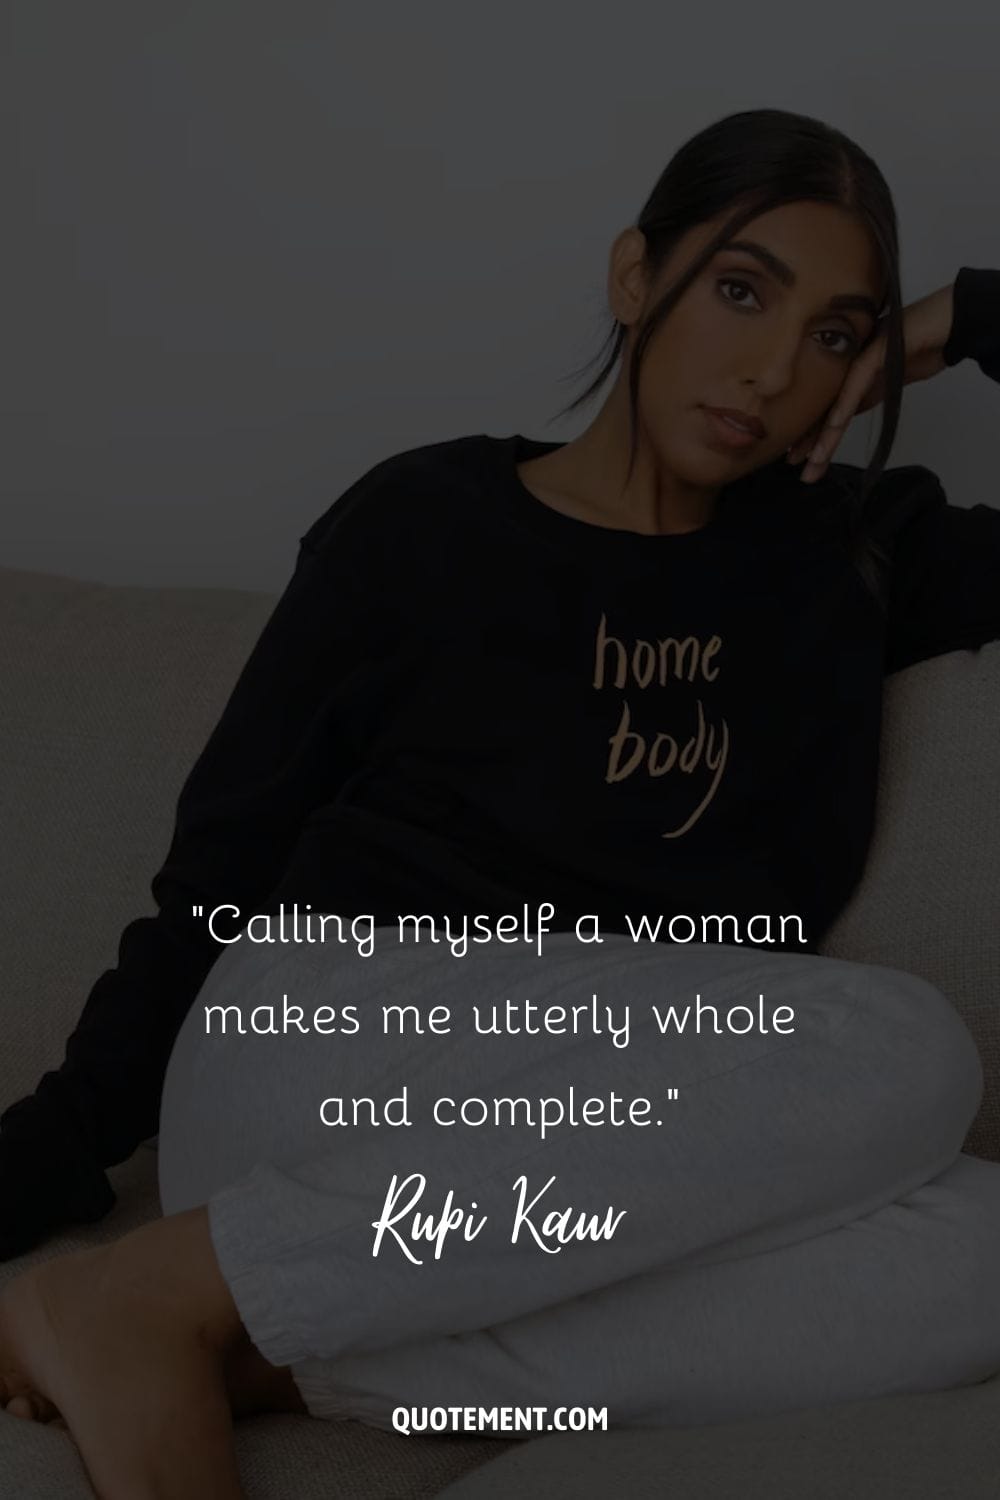 Calling myself a woman makes me utterly whole and complete.